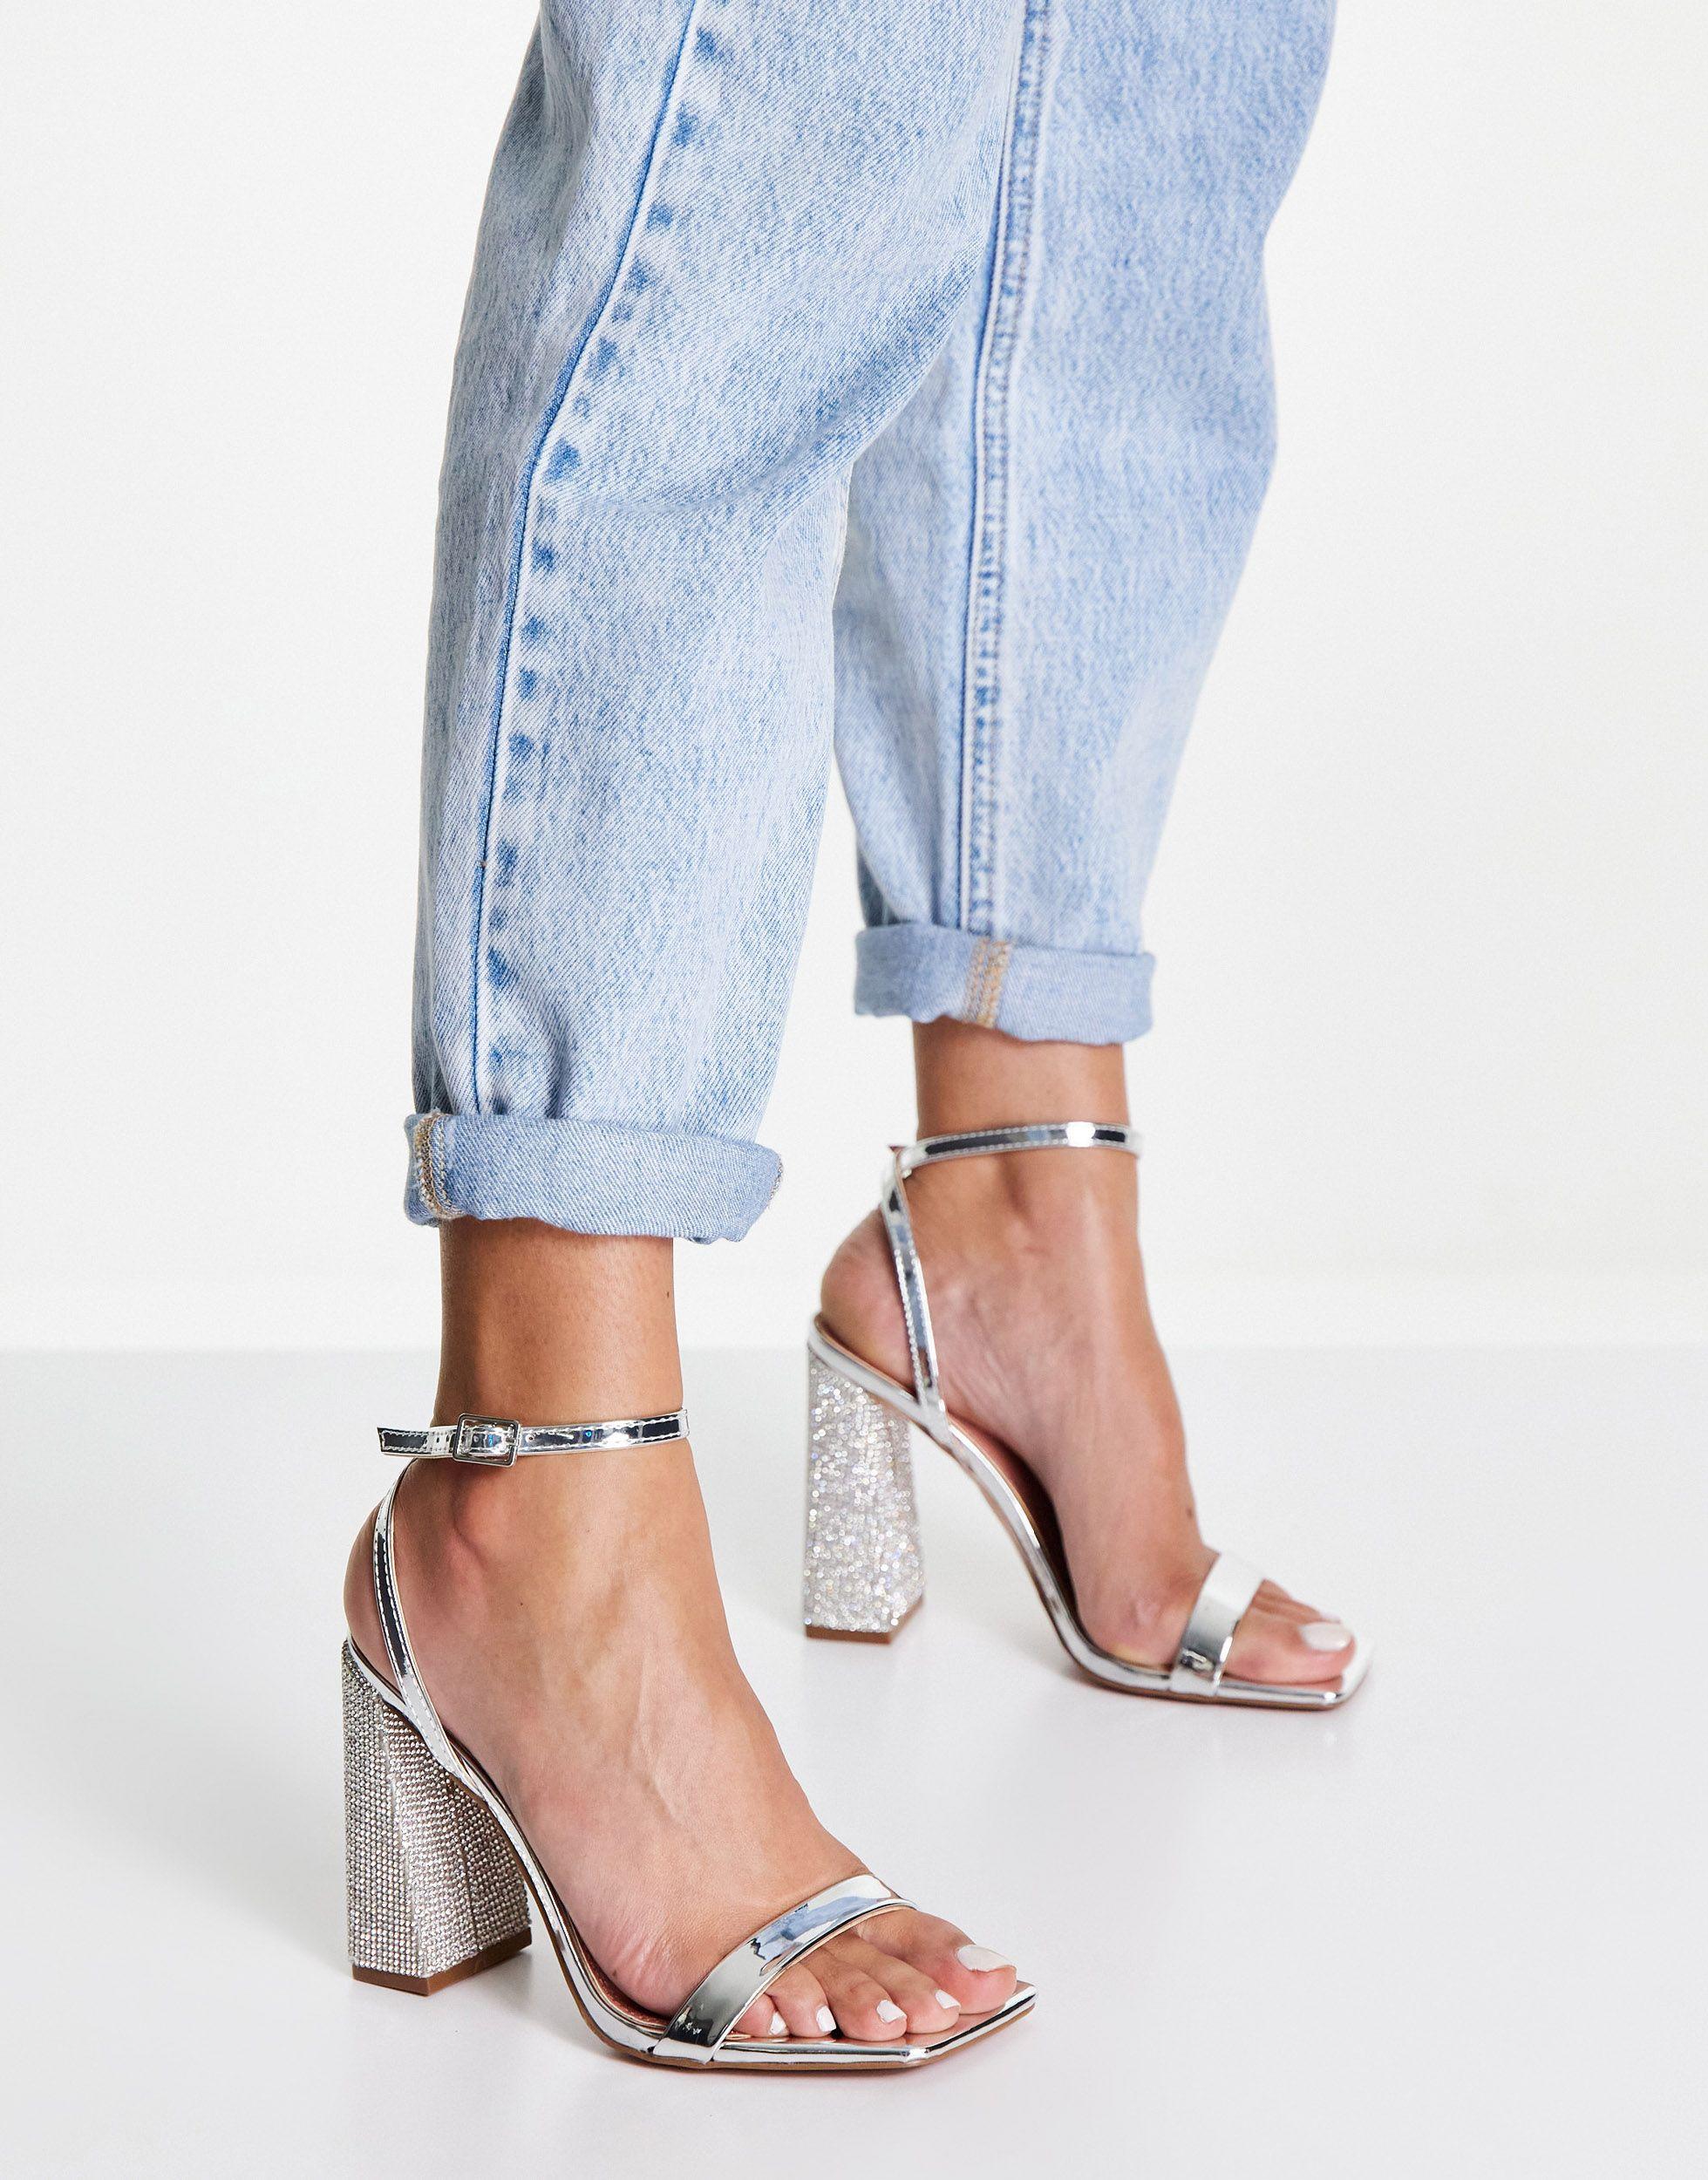 Lure opdagelse Hick ASOS Nora Embellished Block Heel Barely There Heeled Sandals in Metallic |  Lyst